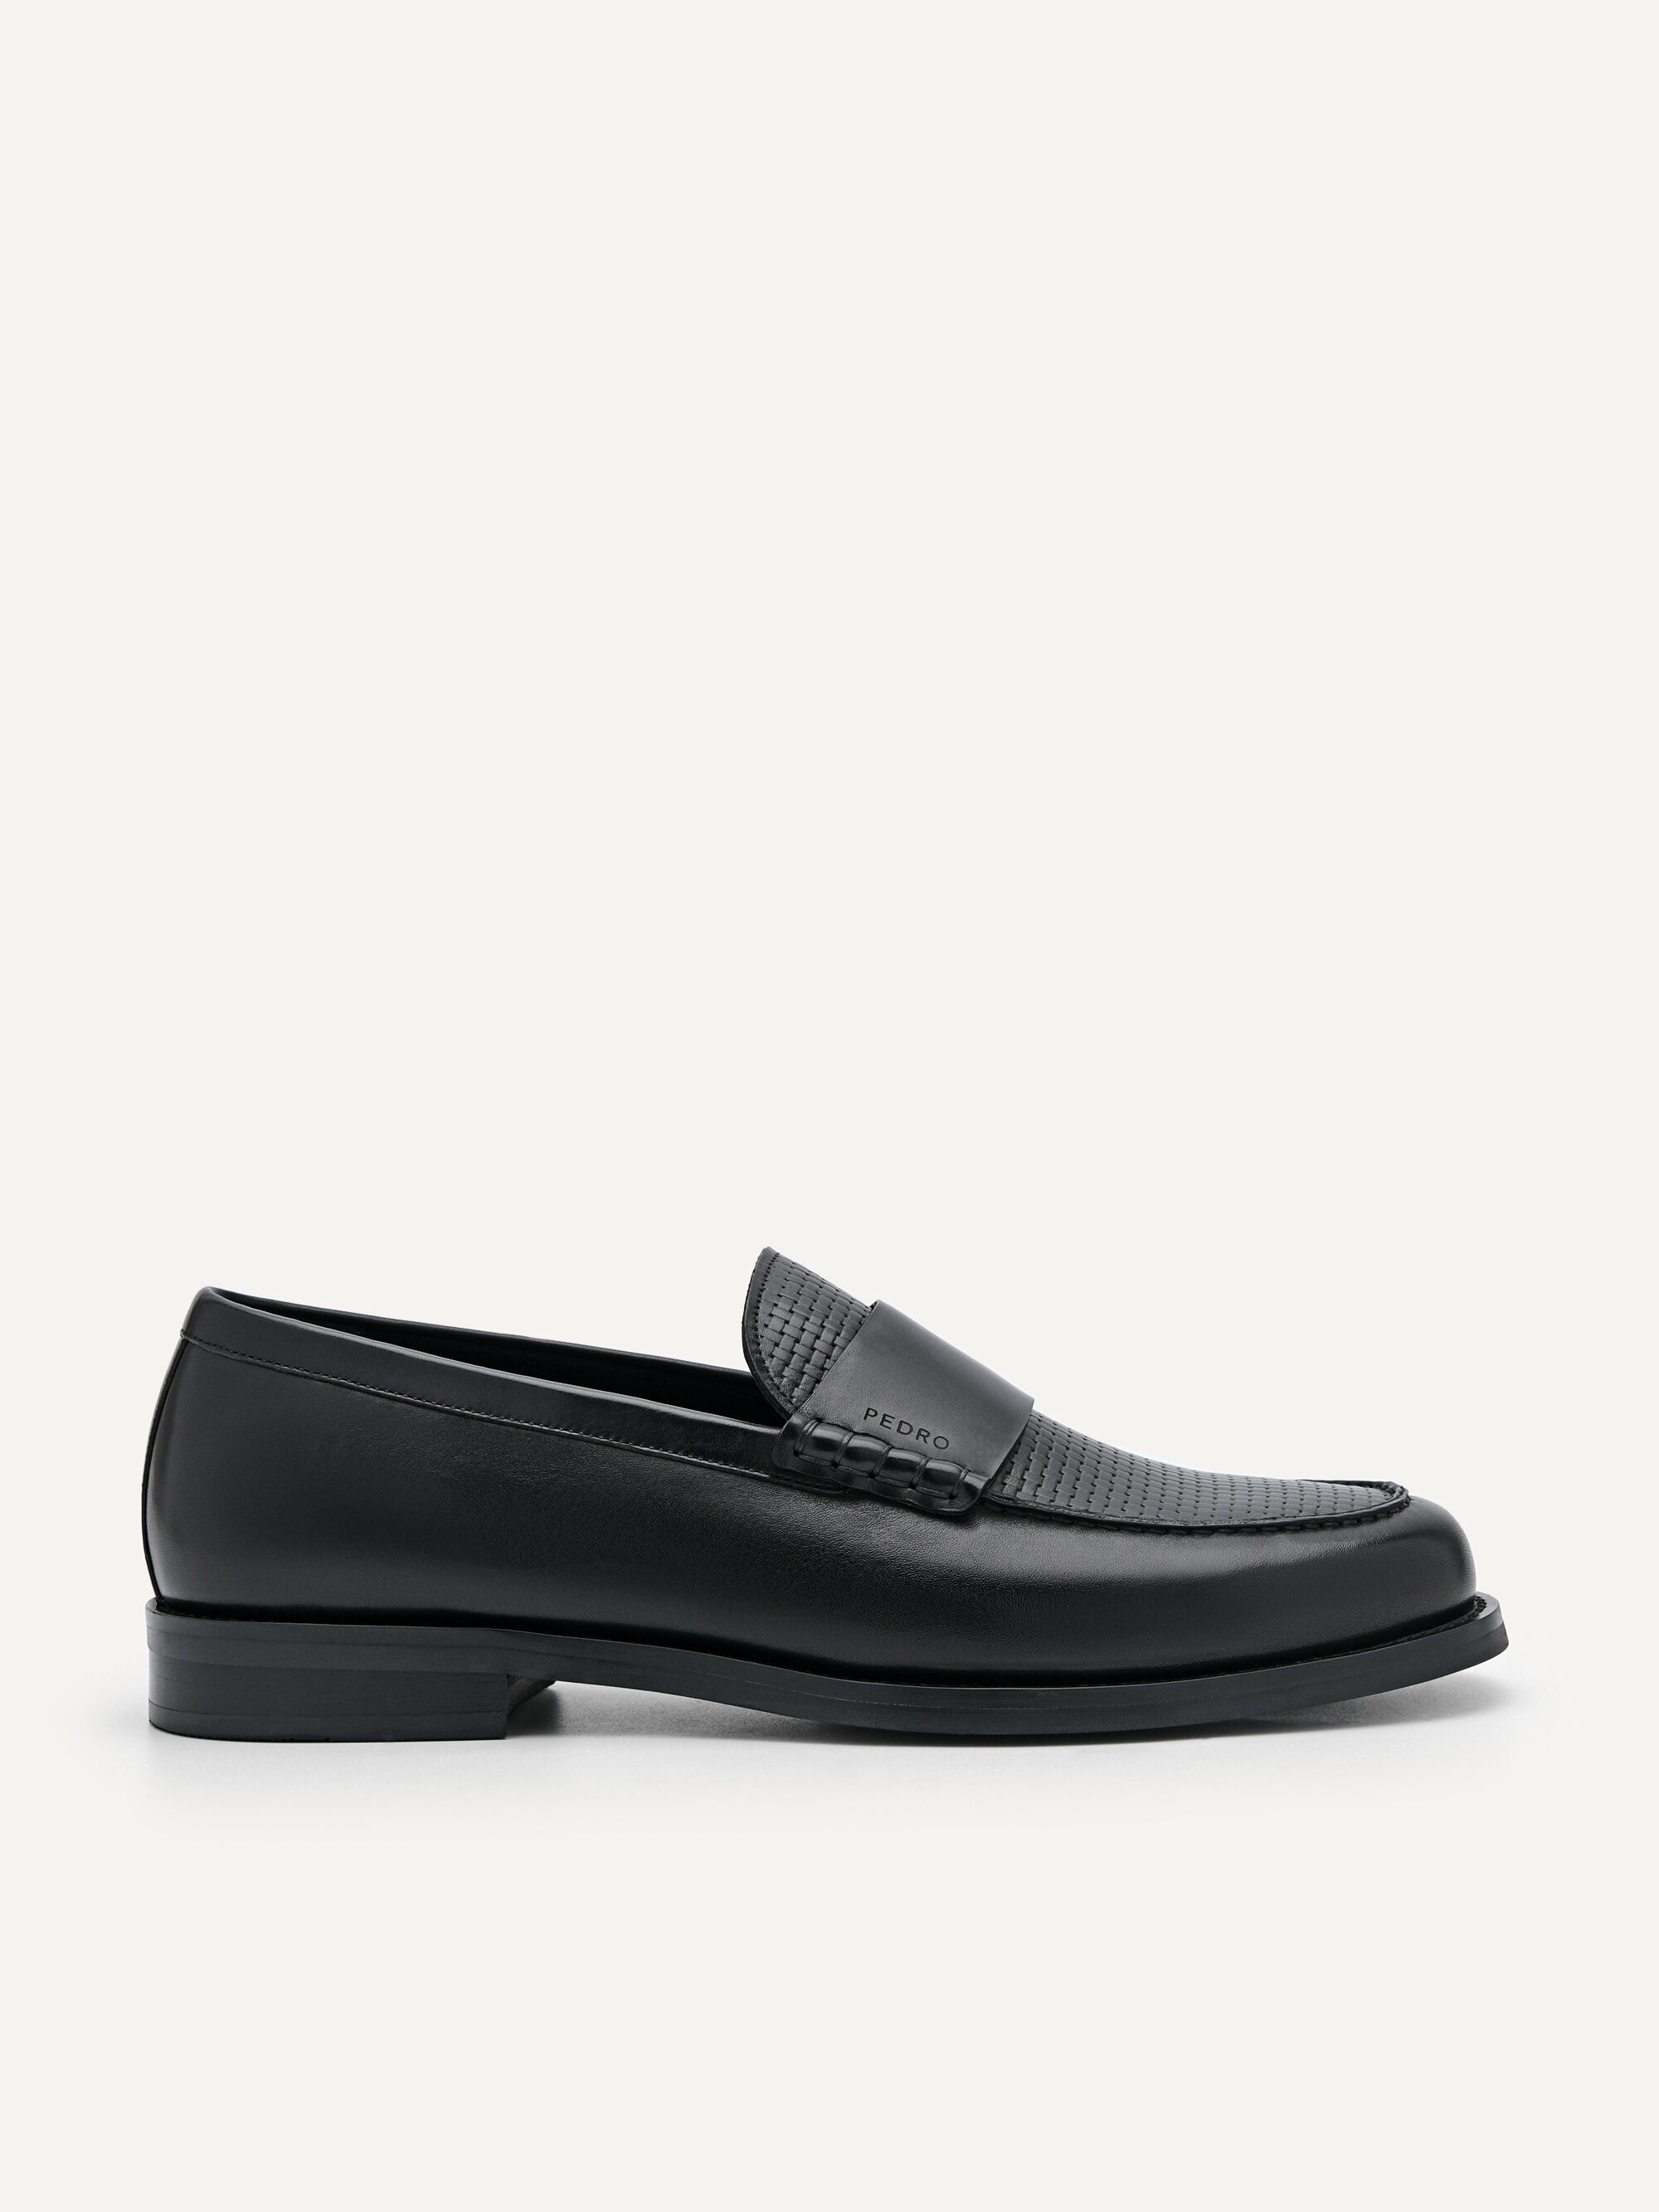 Black Leather Penny Loafers - PEDRO International